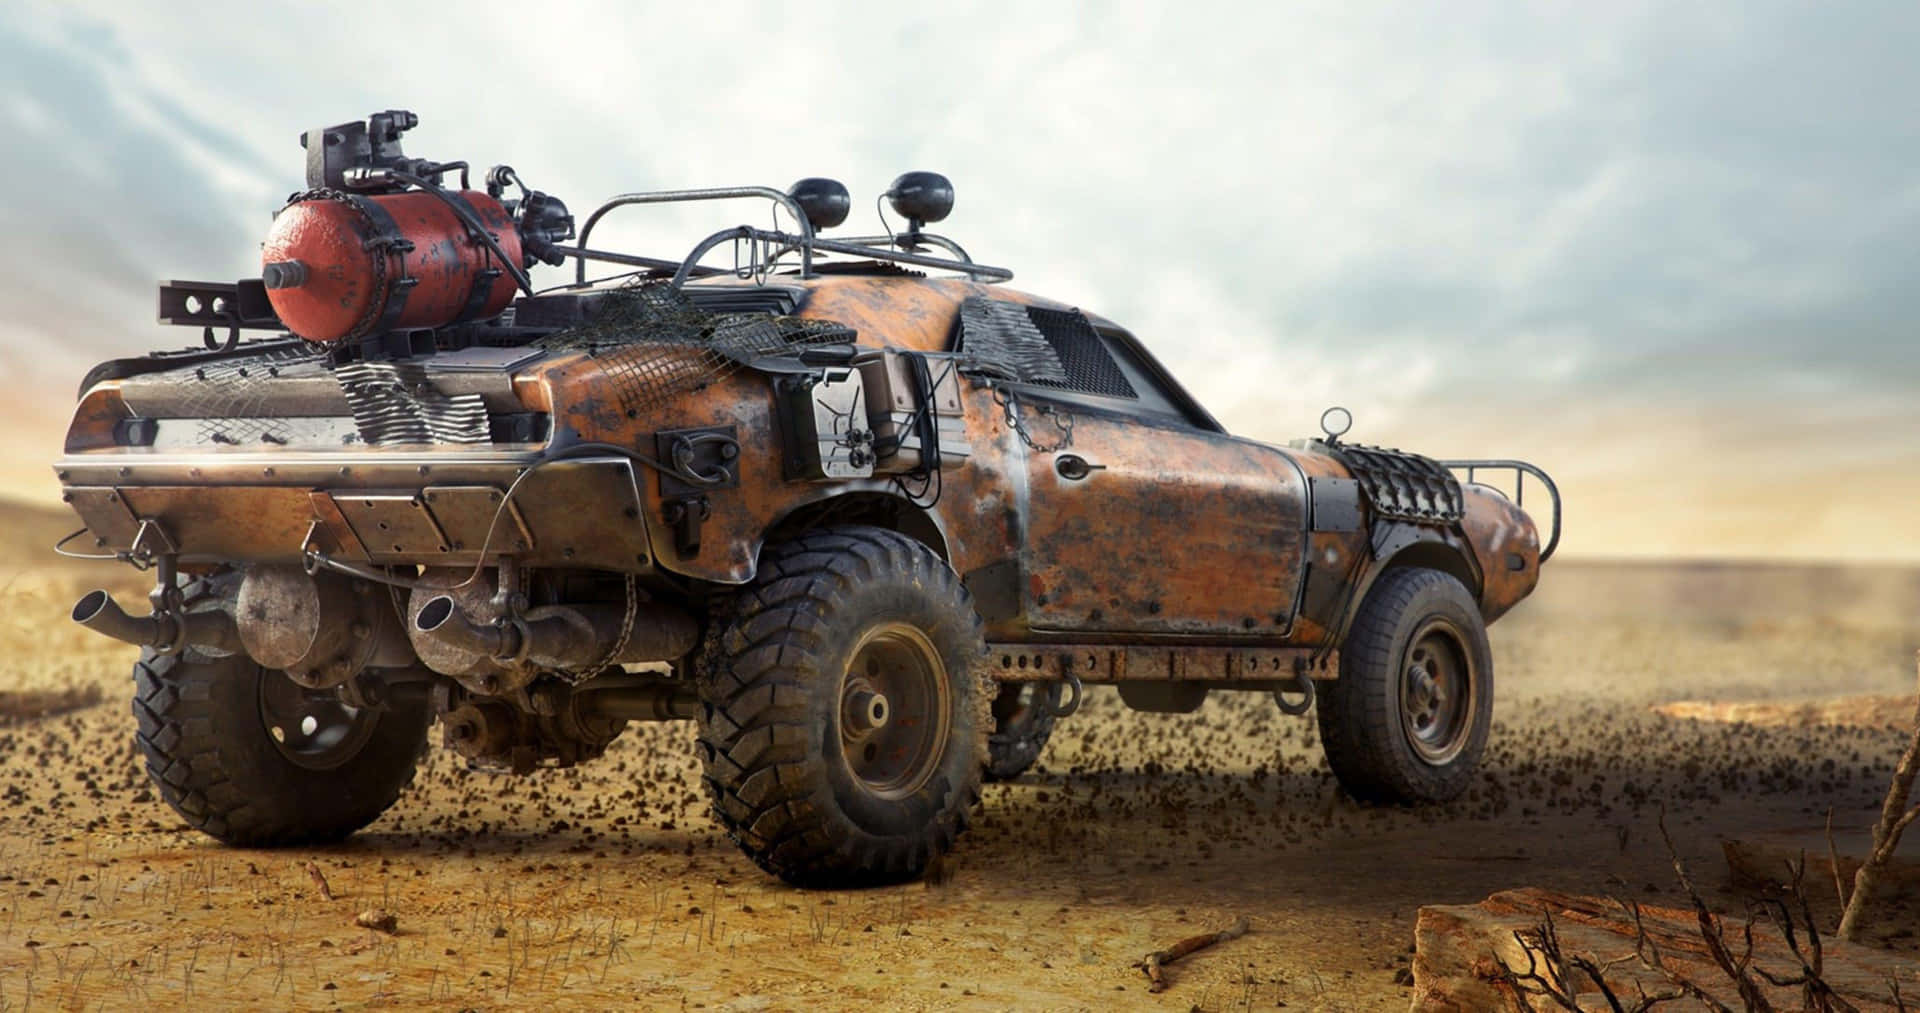 Mad Max Style Post Apocalyptic Vehicle Background